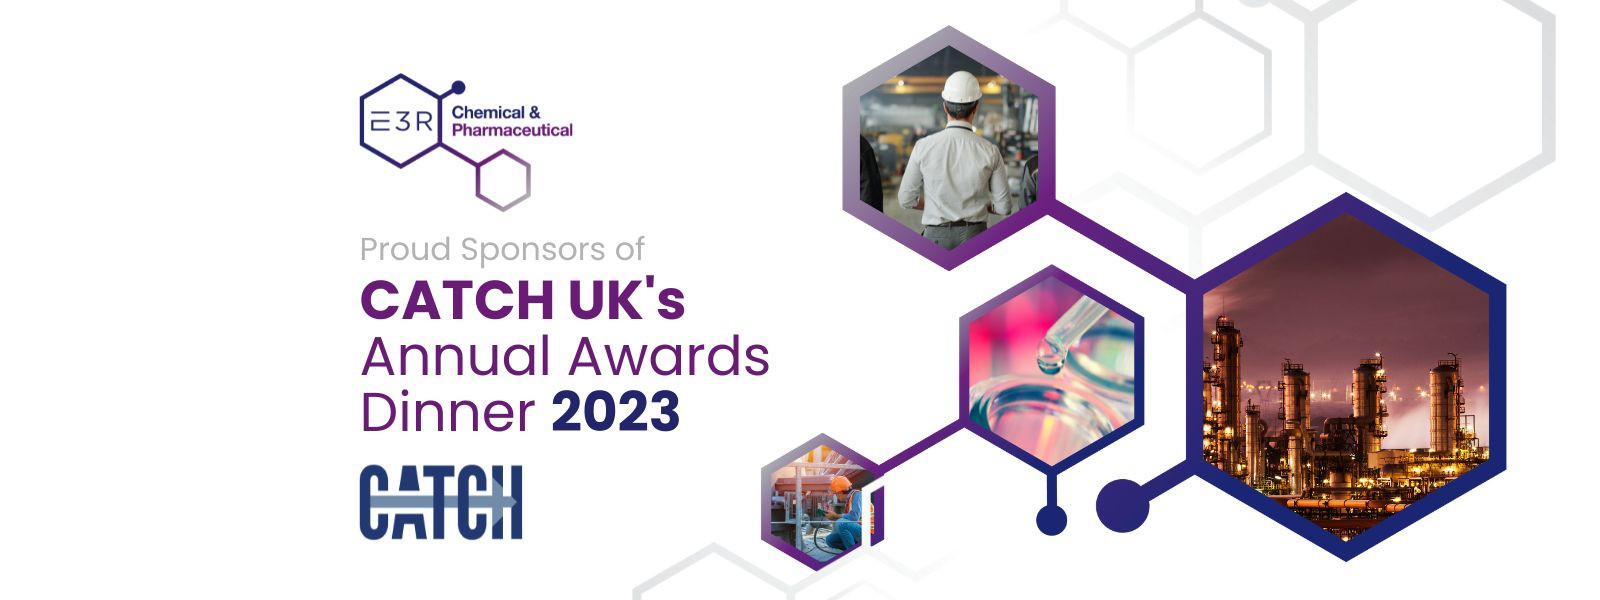 E3R Chemical and Pharmaceutical division announced as platinum sponsors for CATCH UK Annual Awards Dinner 2023